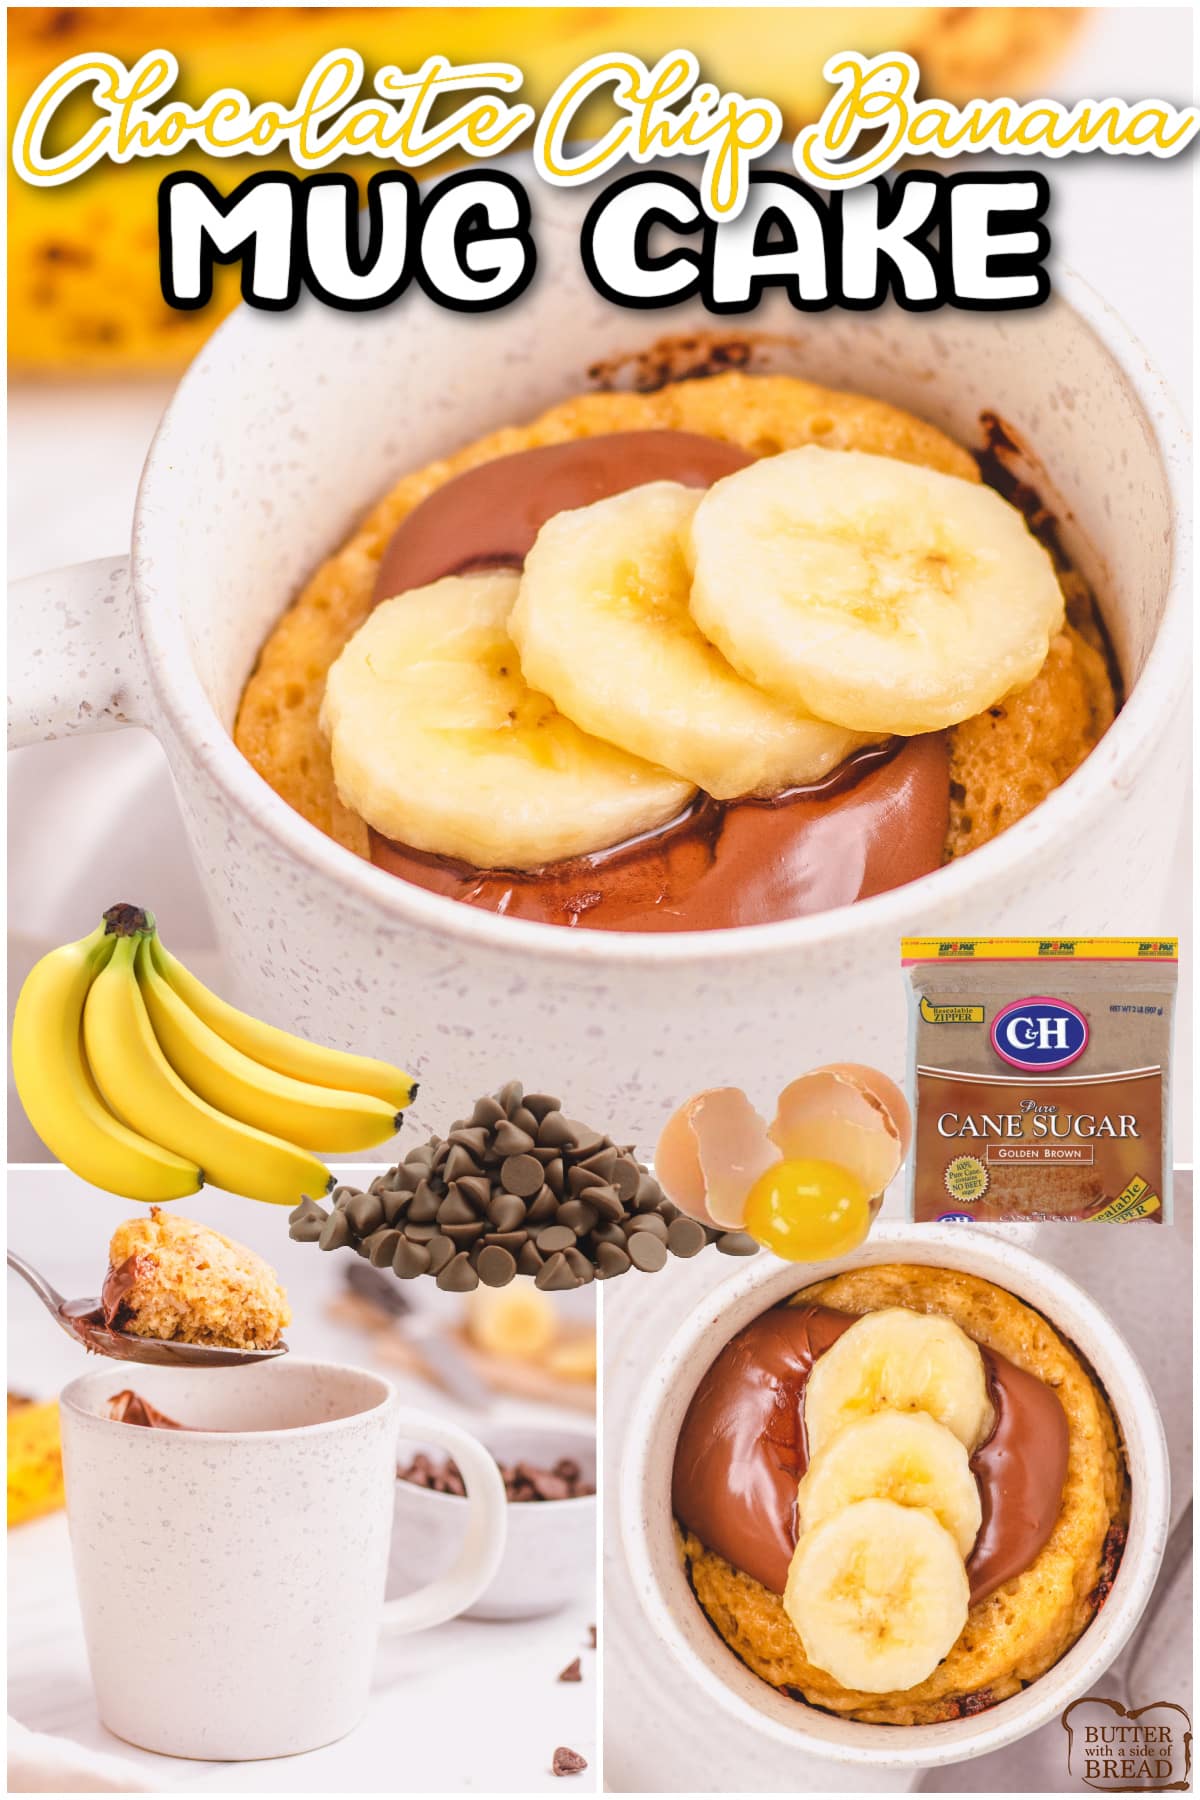 Chocolate Chip Banana Mug Cake is a delicious single-serving treat that's ready in less than 5 minutes! Chocolate chip mug cake packed with yummy banana flavor in every bite!